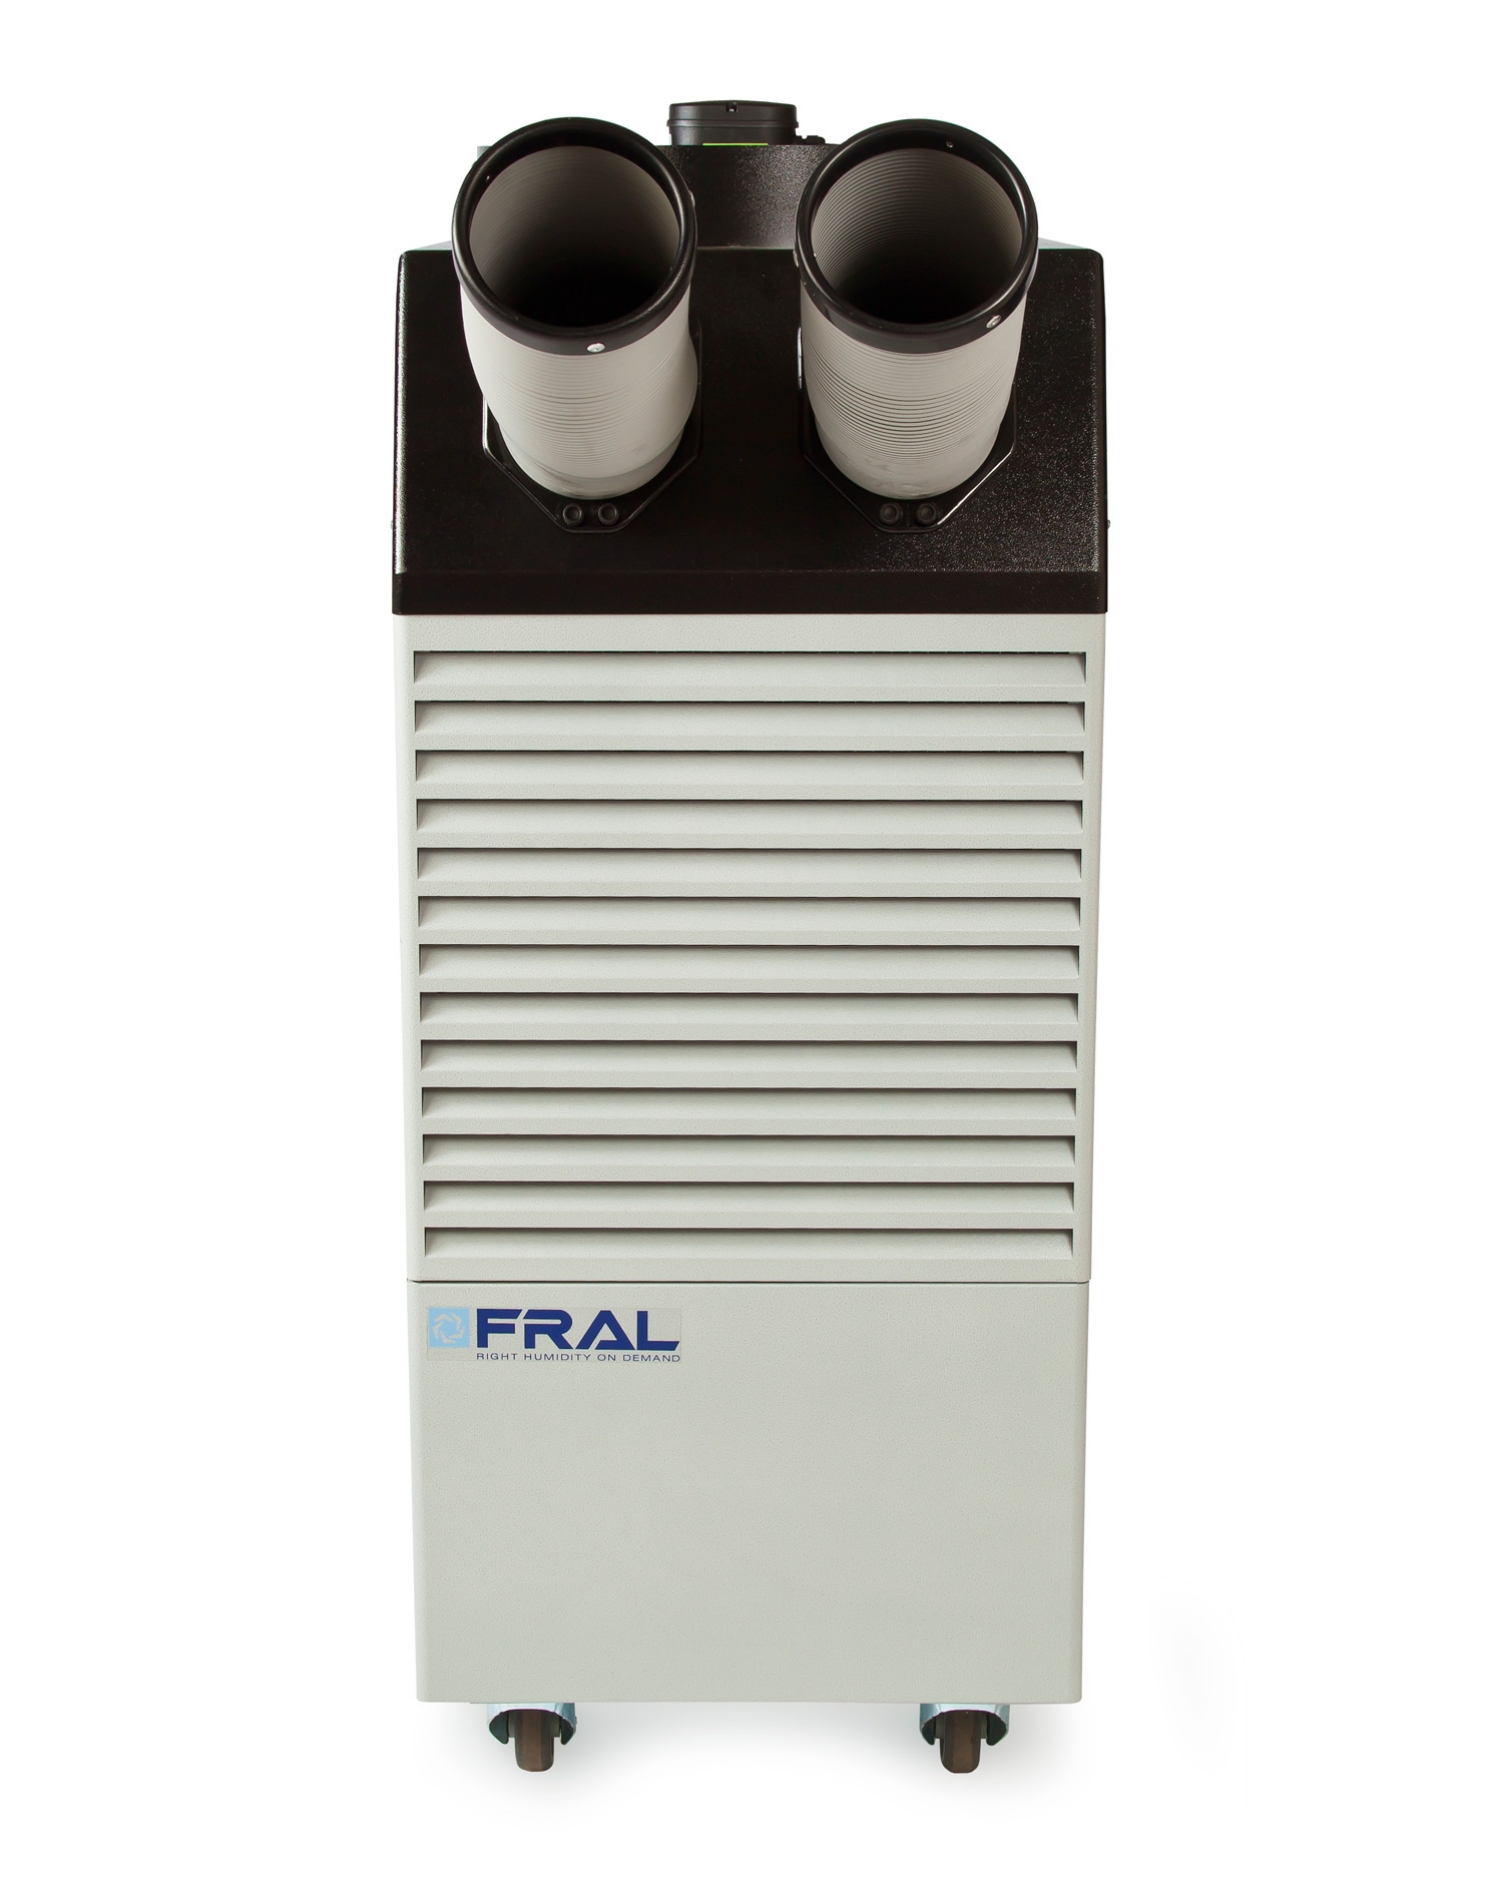 Fral Blizzard 7.3kw Industrial Portable Air Conditioning Unit front